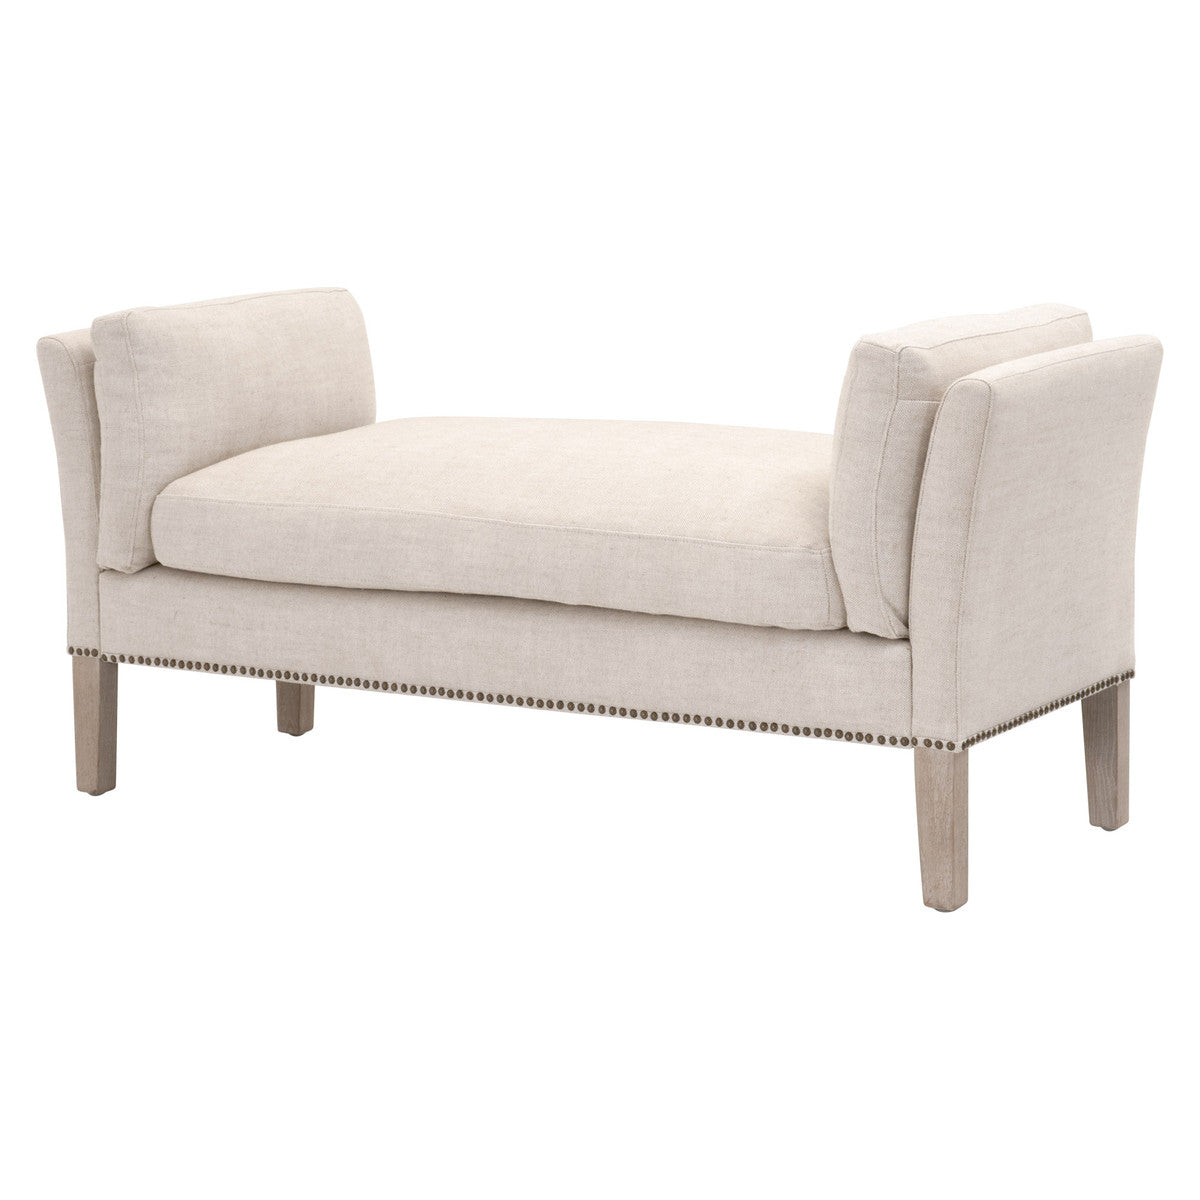 Warner Bench in Performance Bisque French Linen, Natural Gray Ash - 6430UP.BIS-GLD/NG